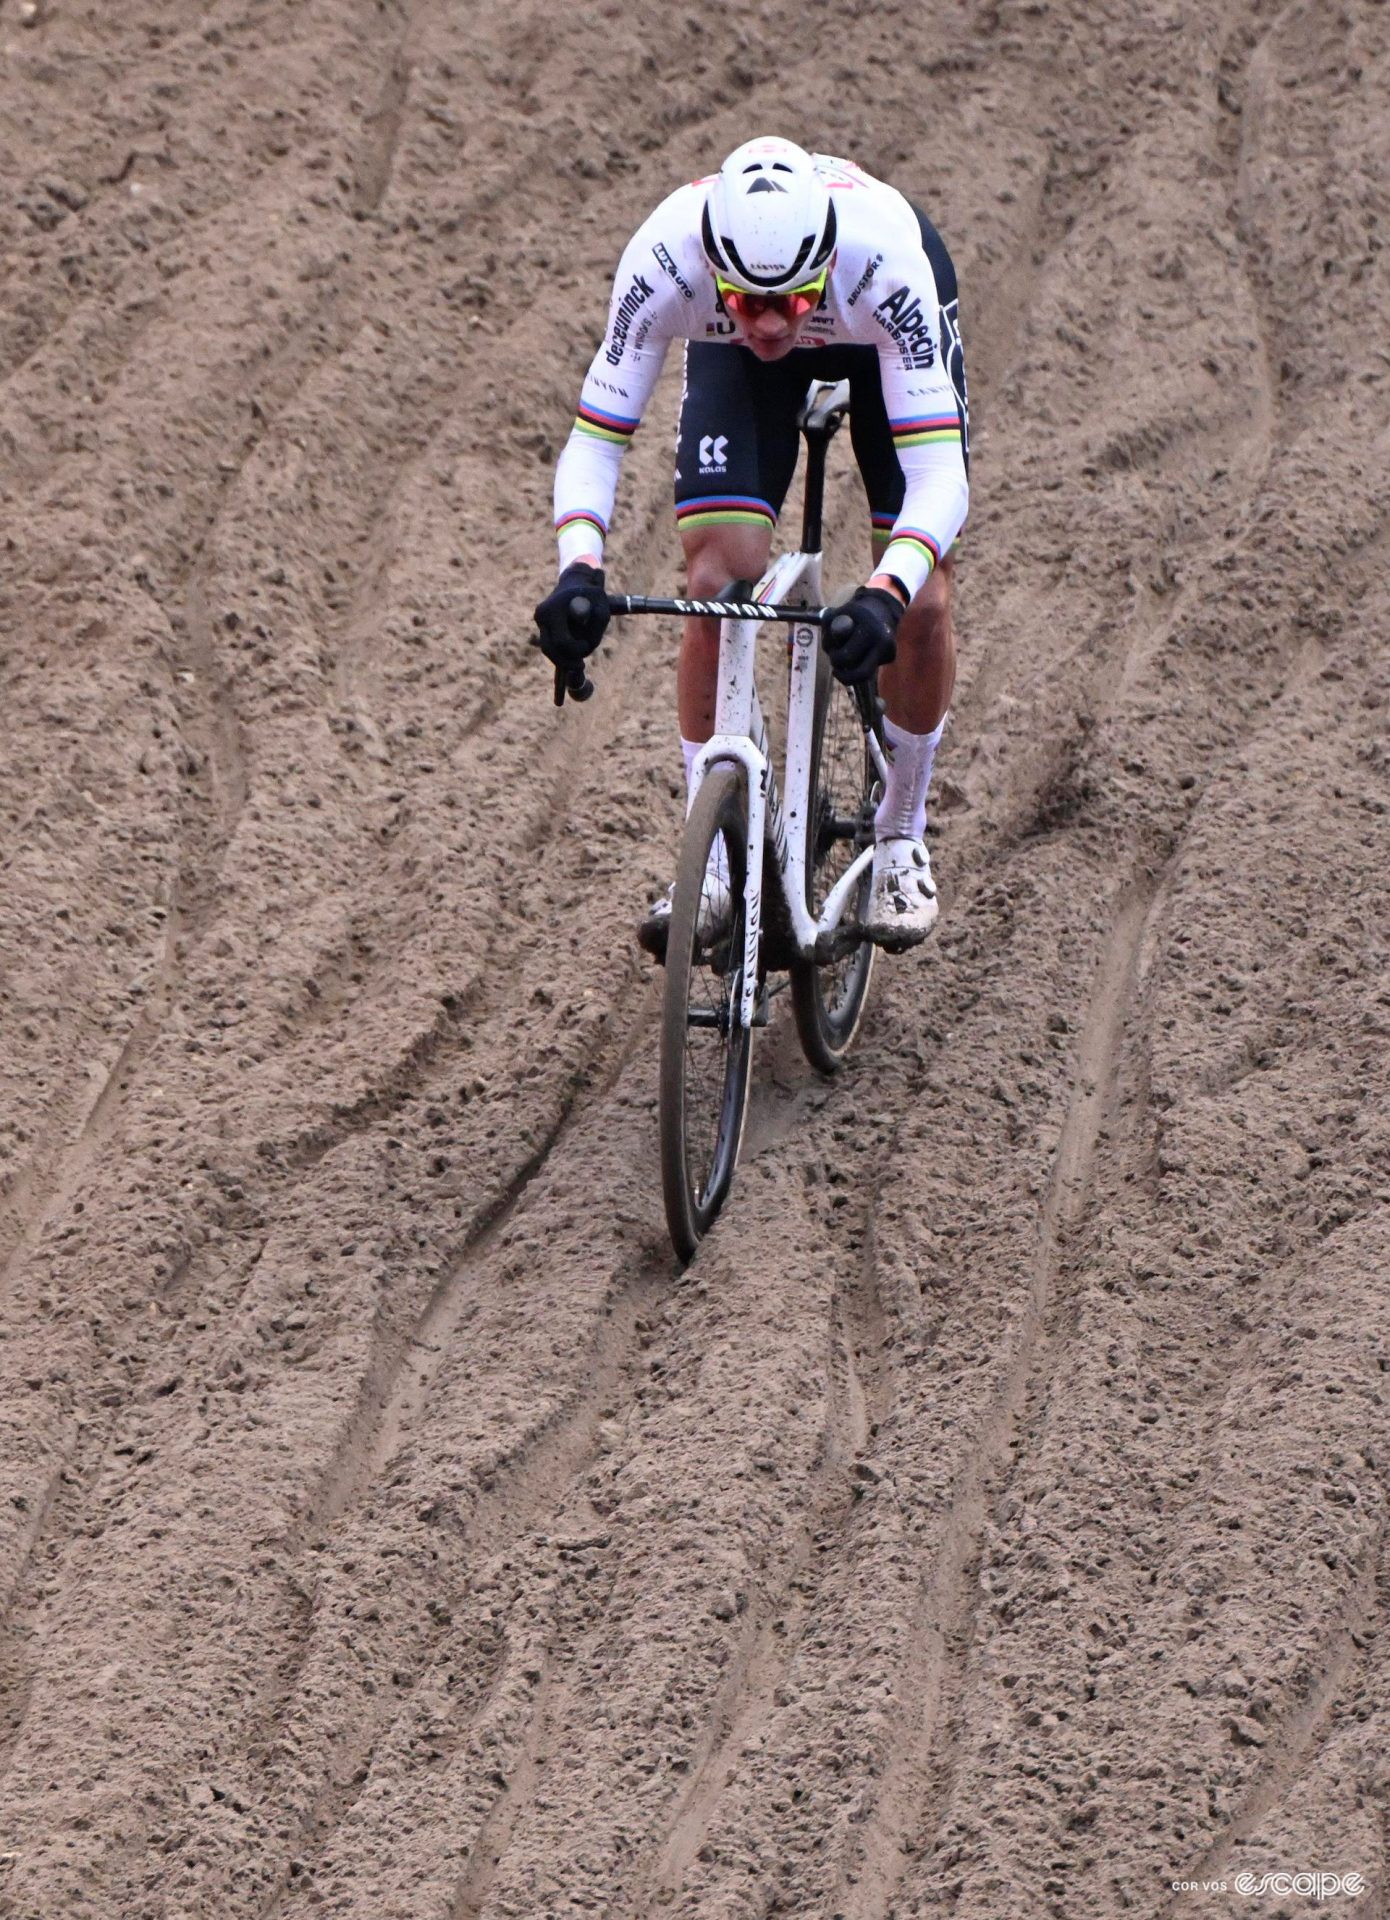 Mathieu van der Poel descends through the sand during UCI World Cup Zonhoven.